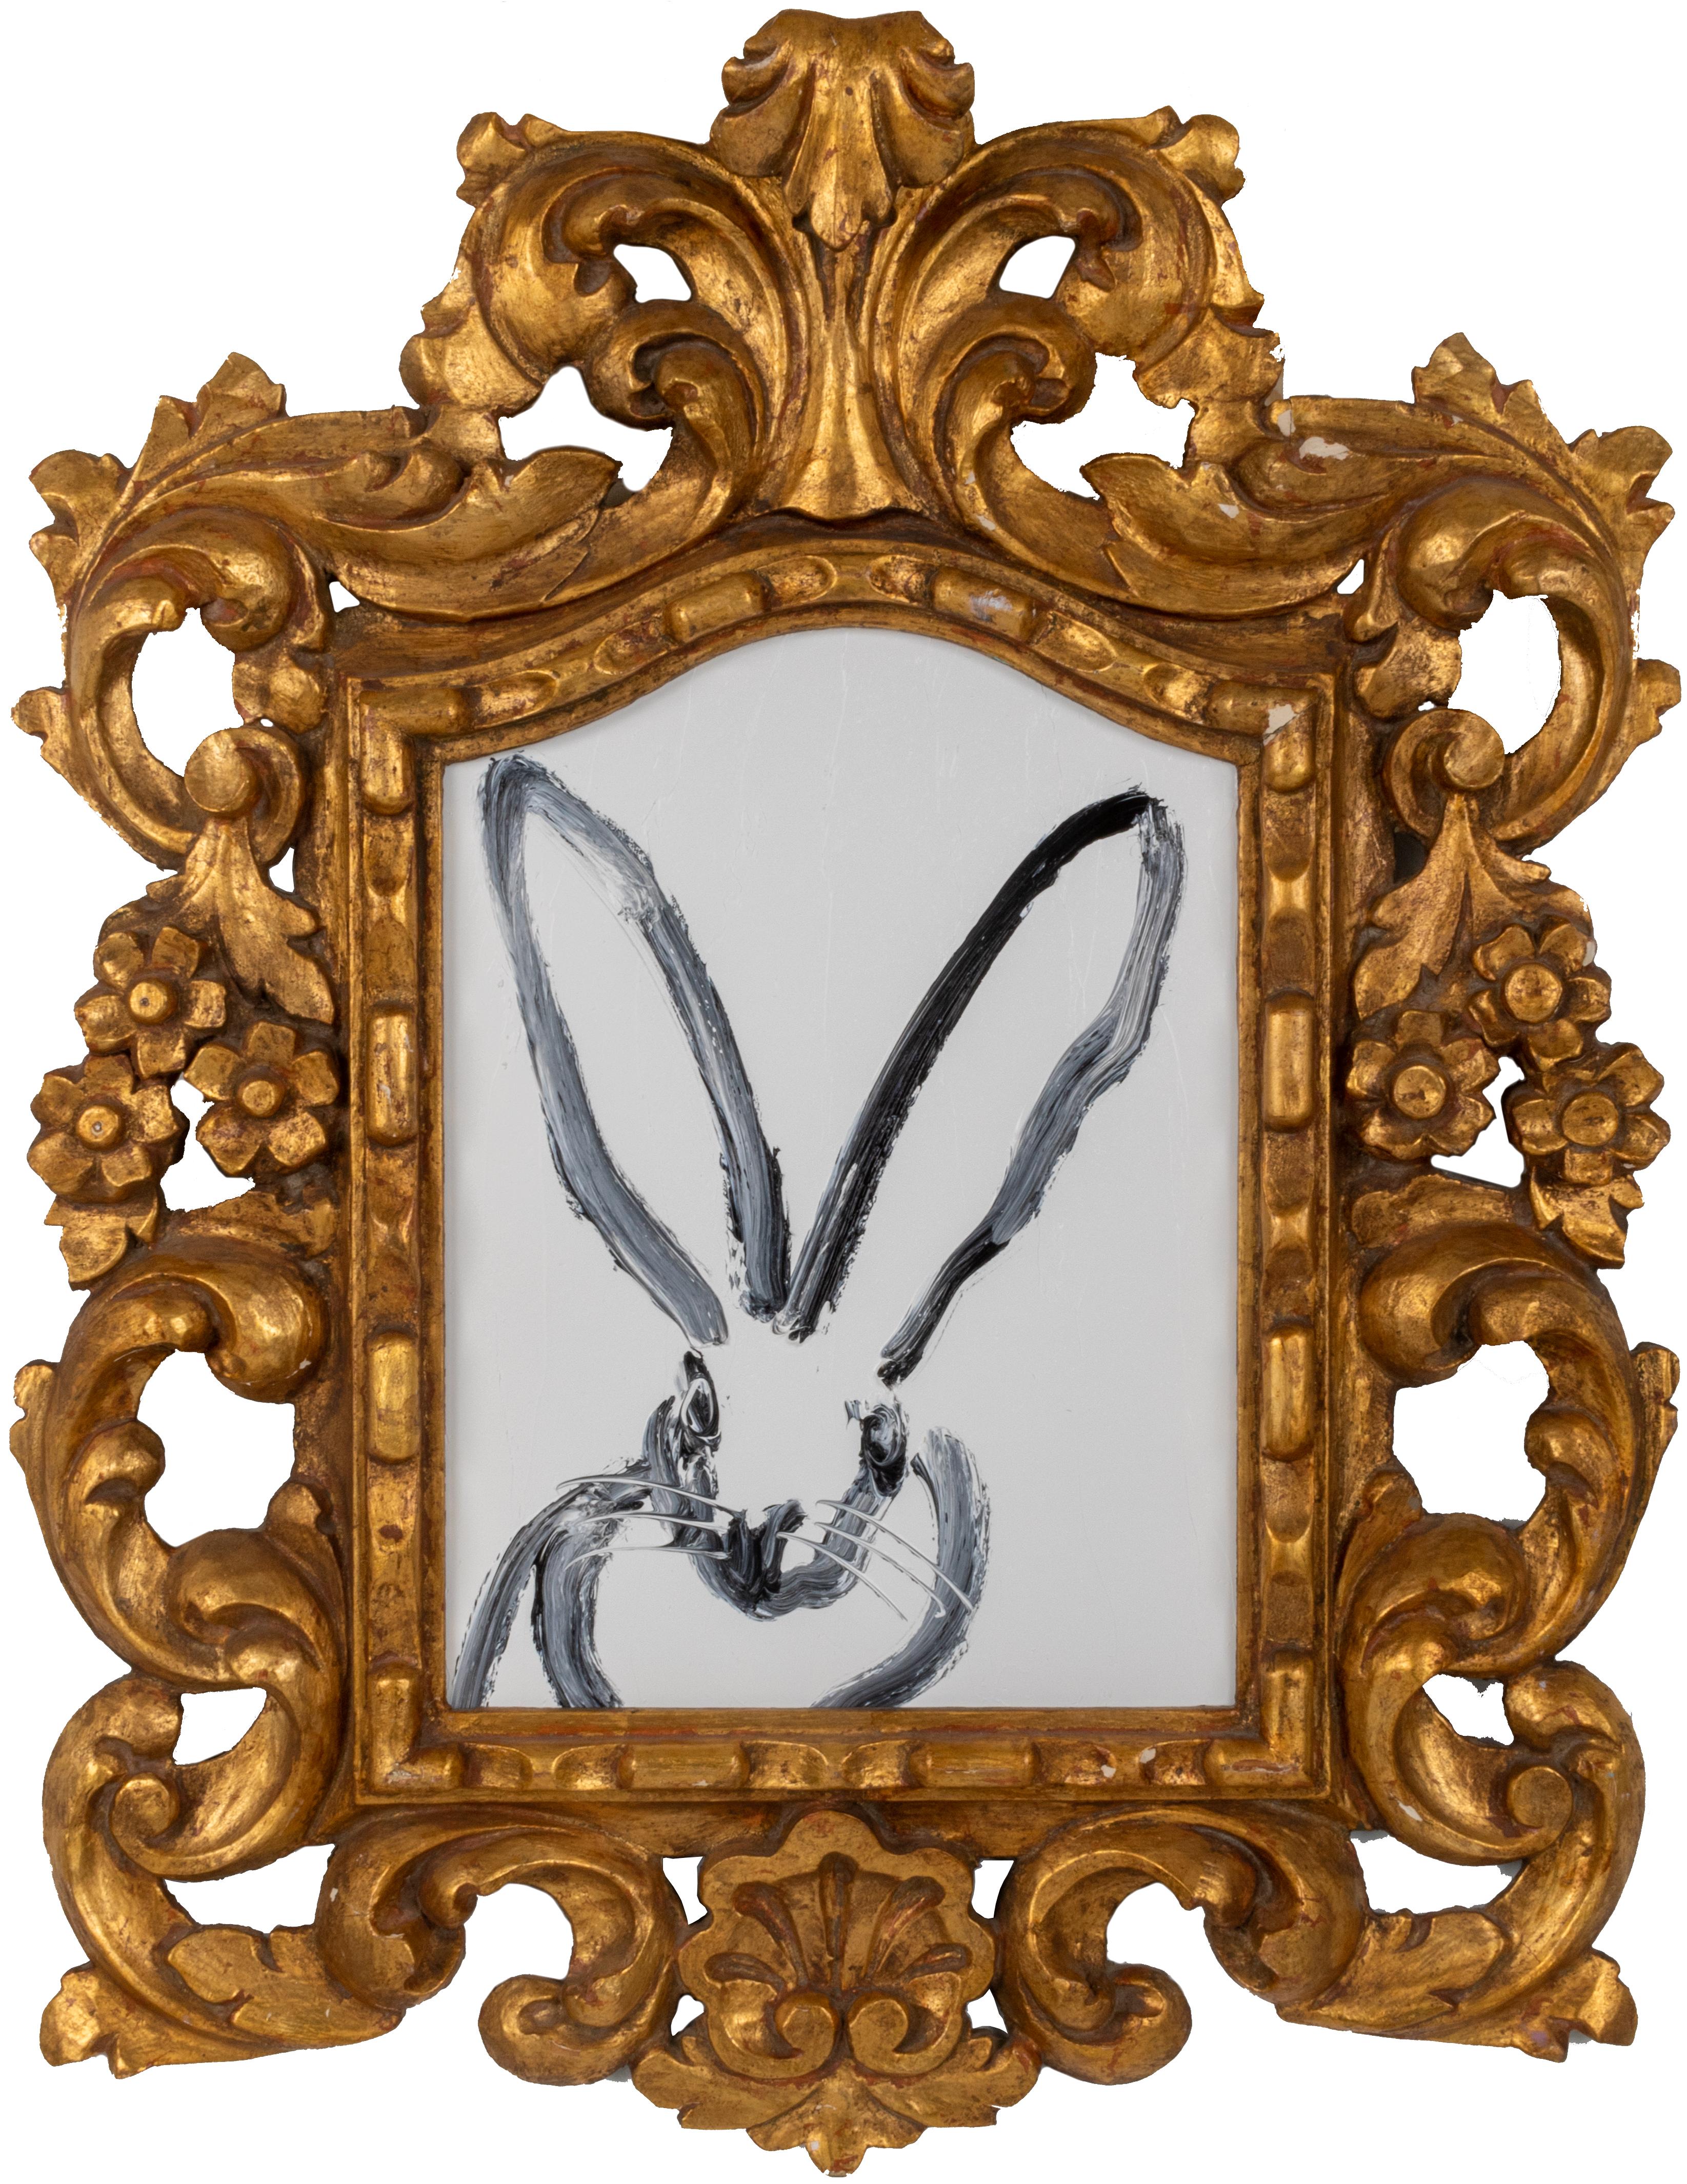 Hunt Slonem "Summer Fun" Black & White Bunny 
Black outlined bunny on white surface in a gold ornate frame

Unframed: 26 x 11.5  in.  
Framed: 30 x 22.5 in.
*painting is framed*   

Hunt Slonem is a well-renowned American artist is known for his